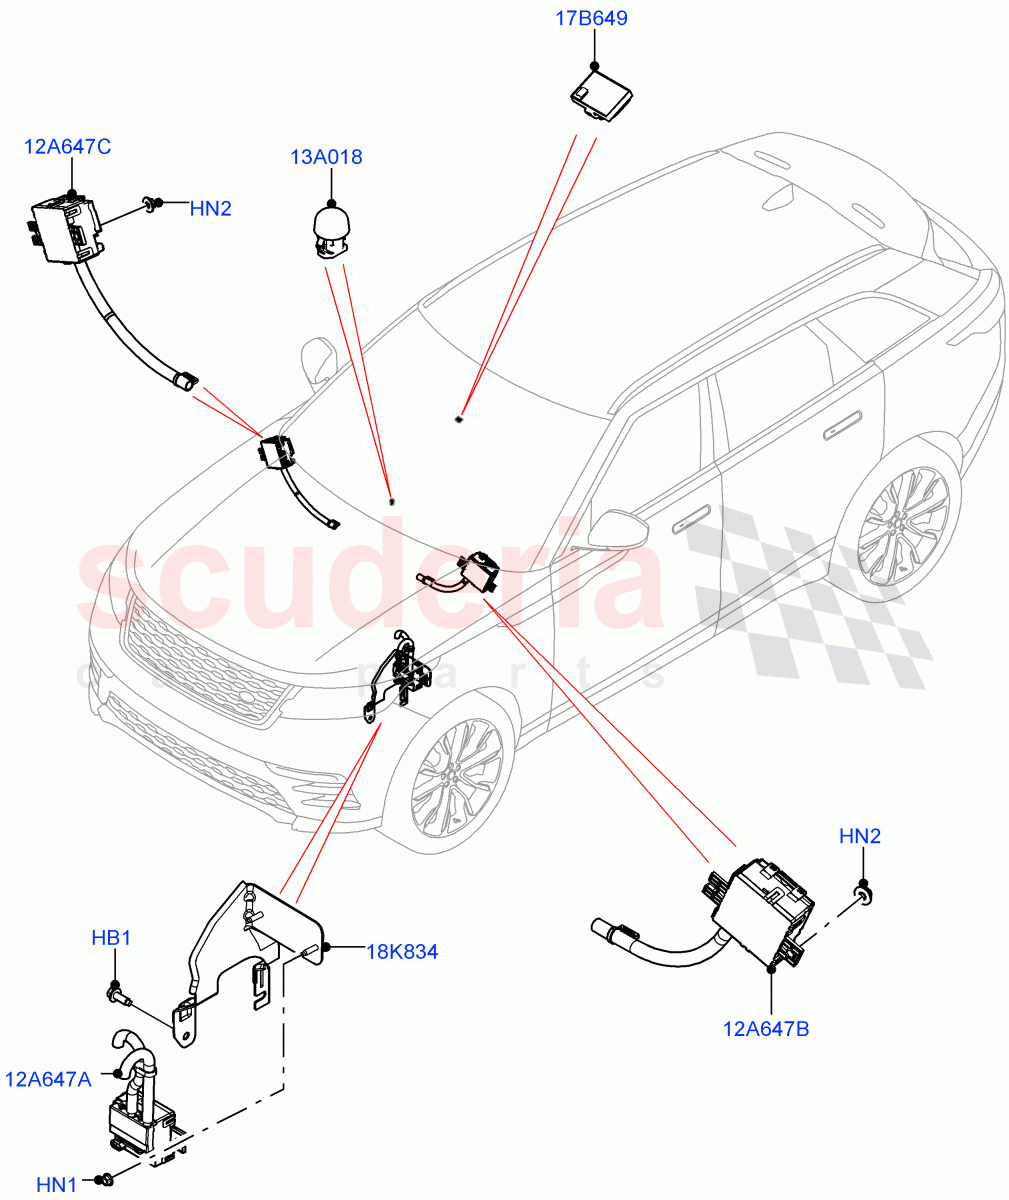 Air Conditioning And Heater Sensors((V)FROMNA000001) of Land Rover Land Rover Range Rover Velar (2017+) [5.0 OHC SGDI SC V8 Petrol]